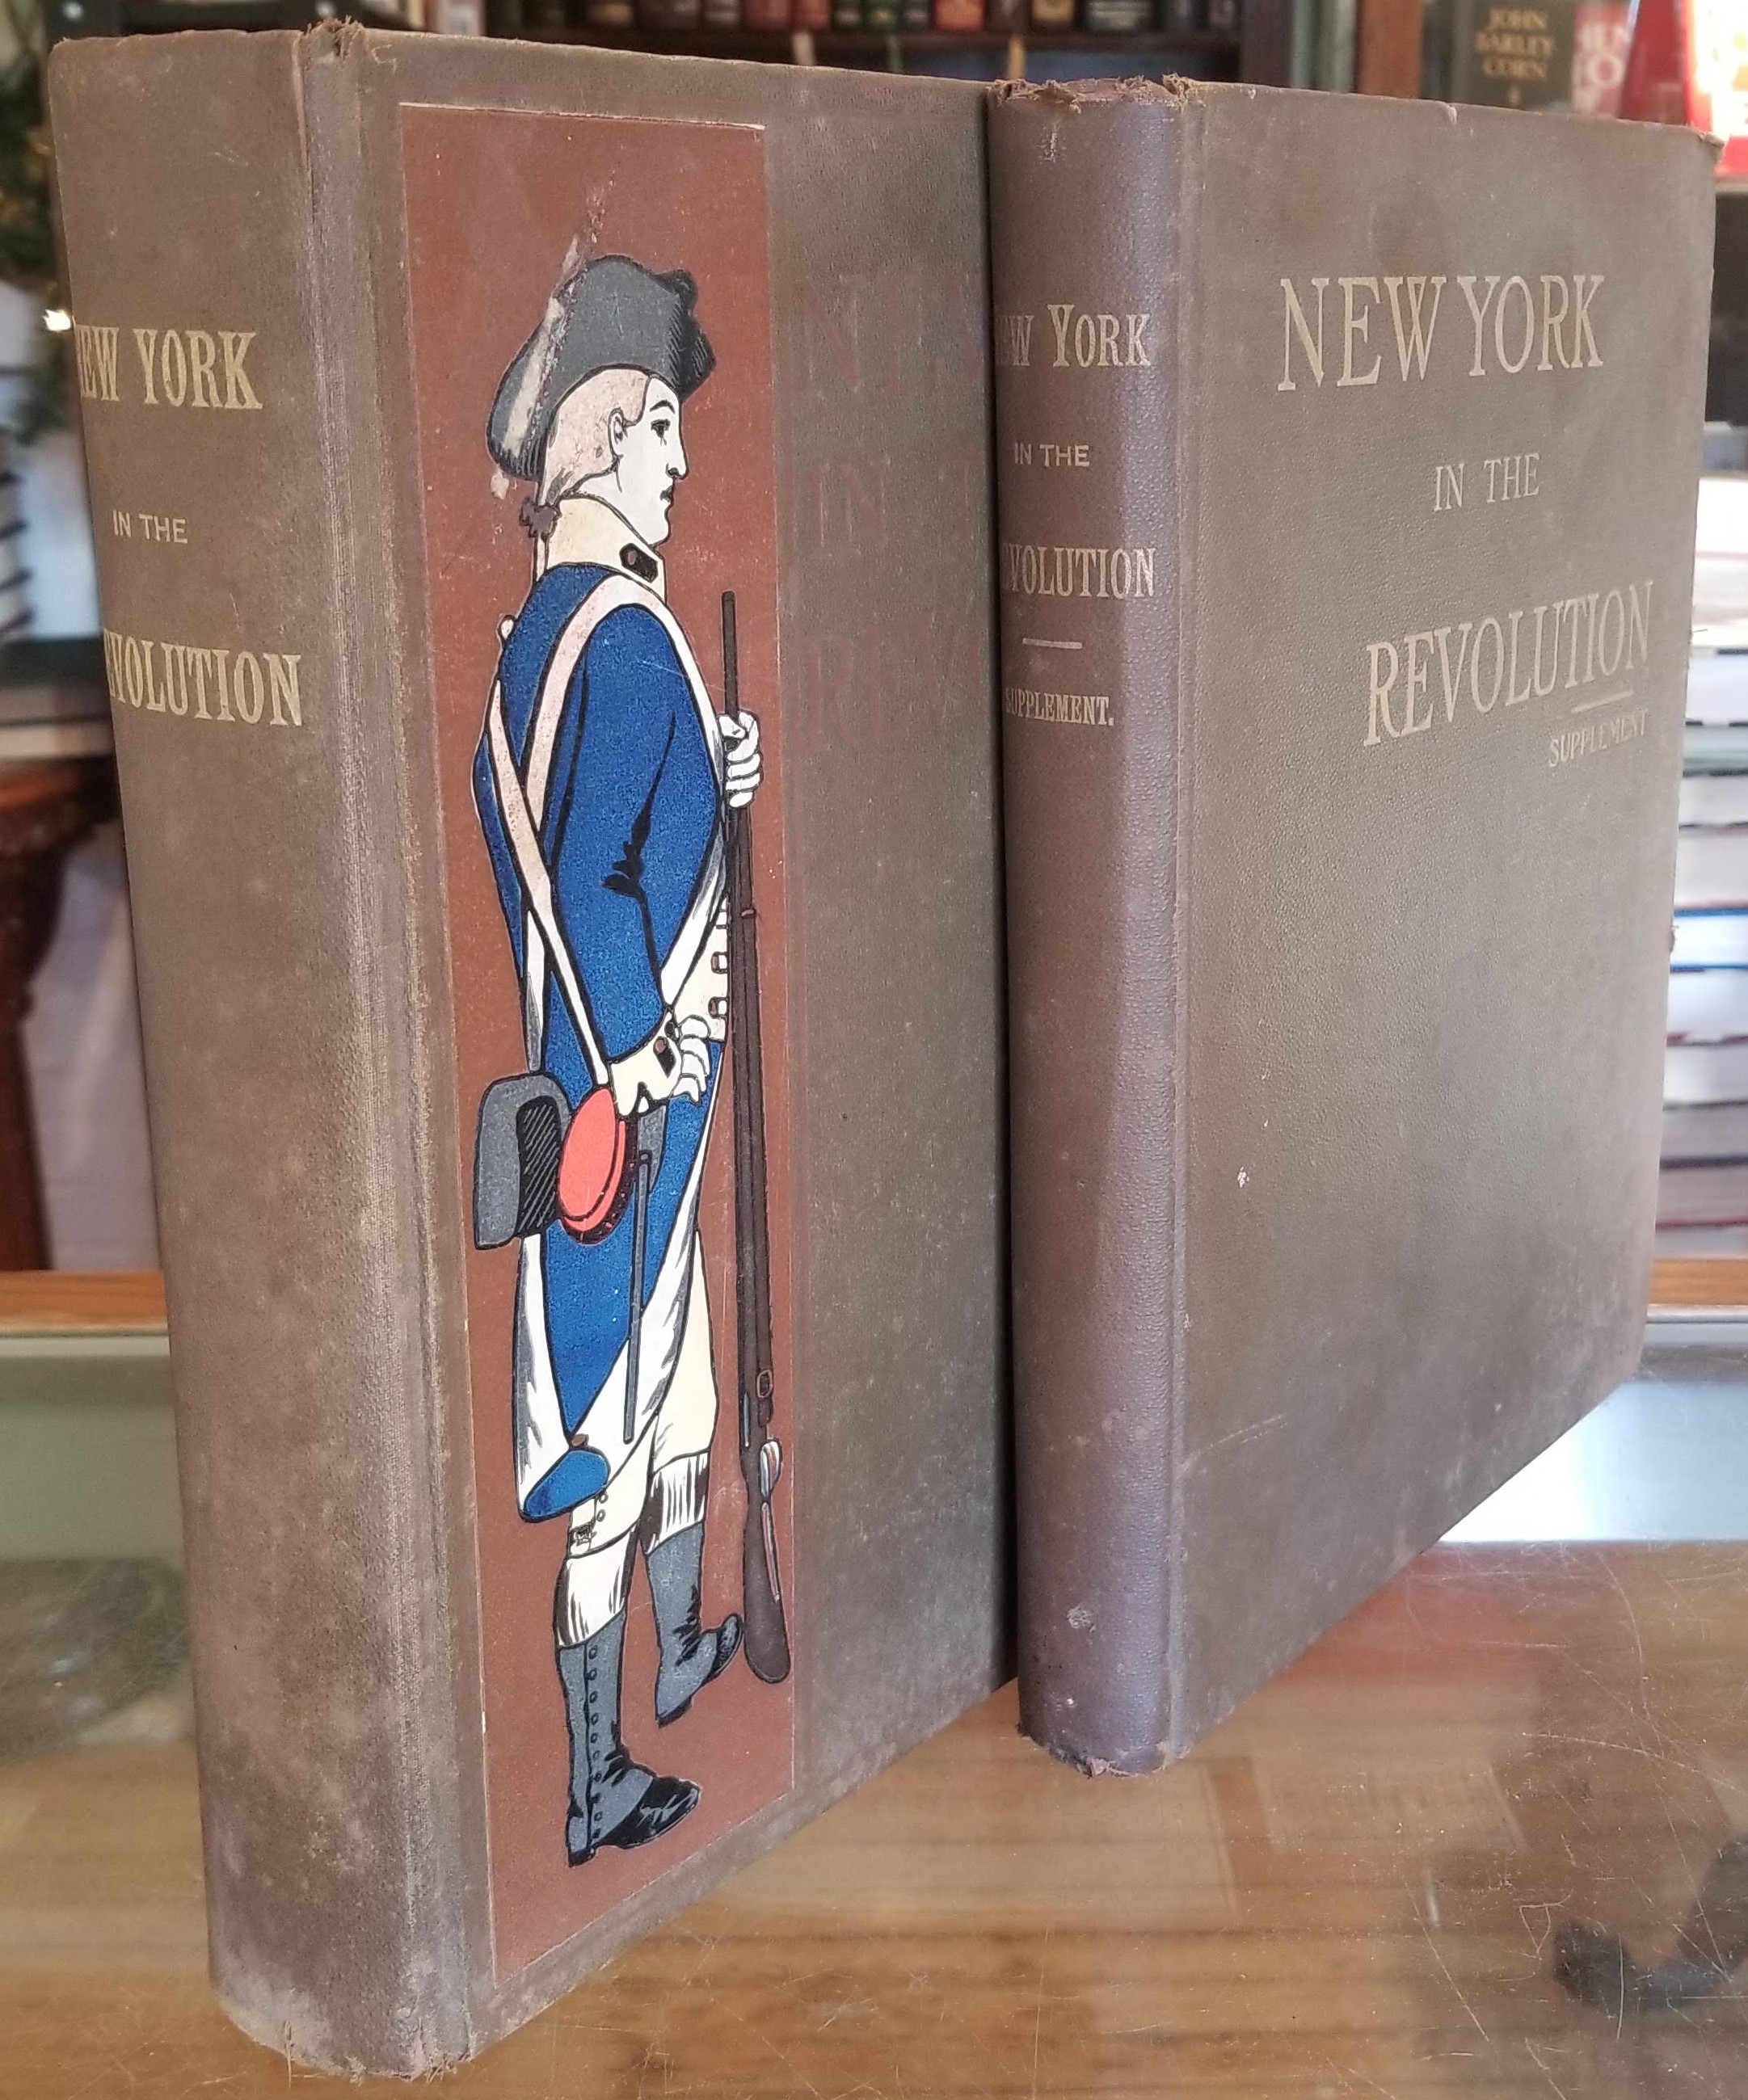 Image for New York in the Revolution as Colony And State. A Compilation of Documents and Records from the Office of the State Comptroller. 2 Volumes